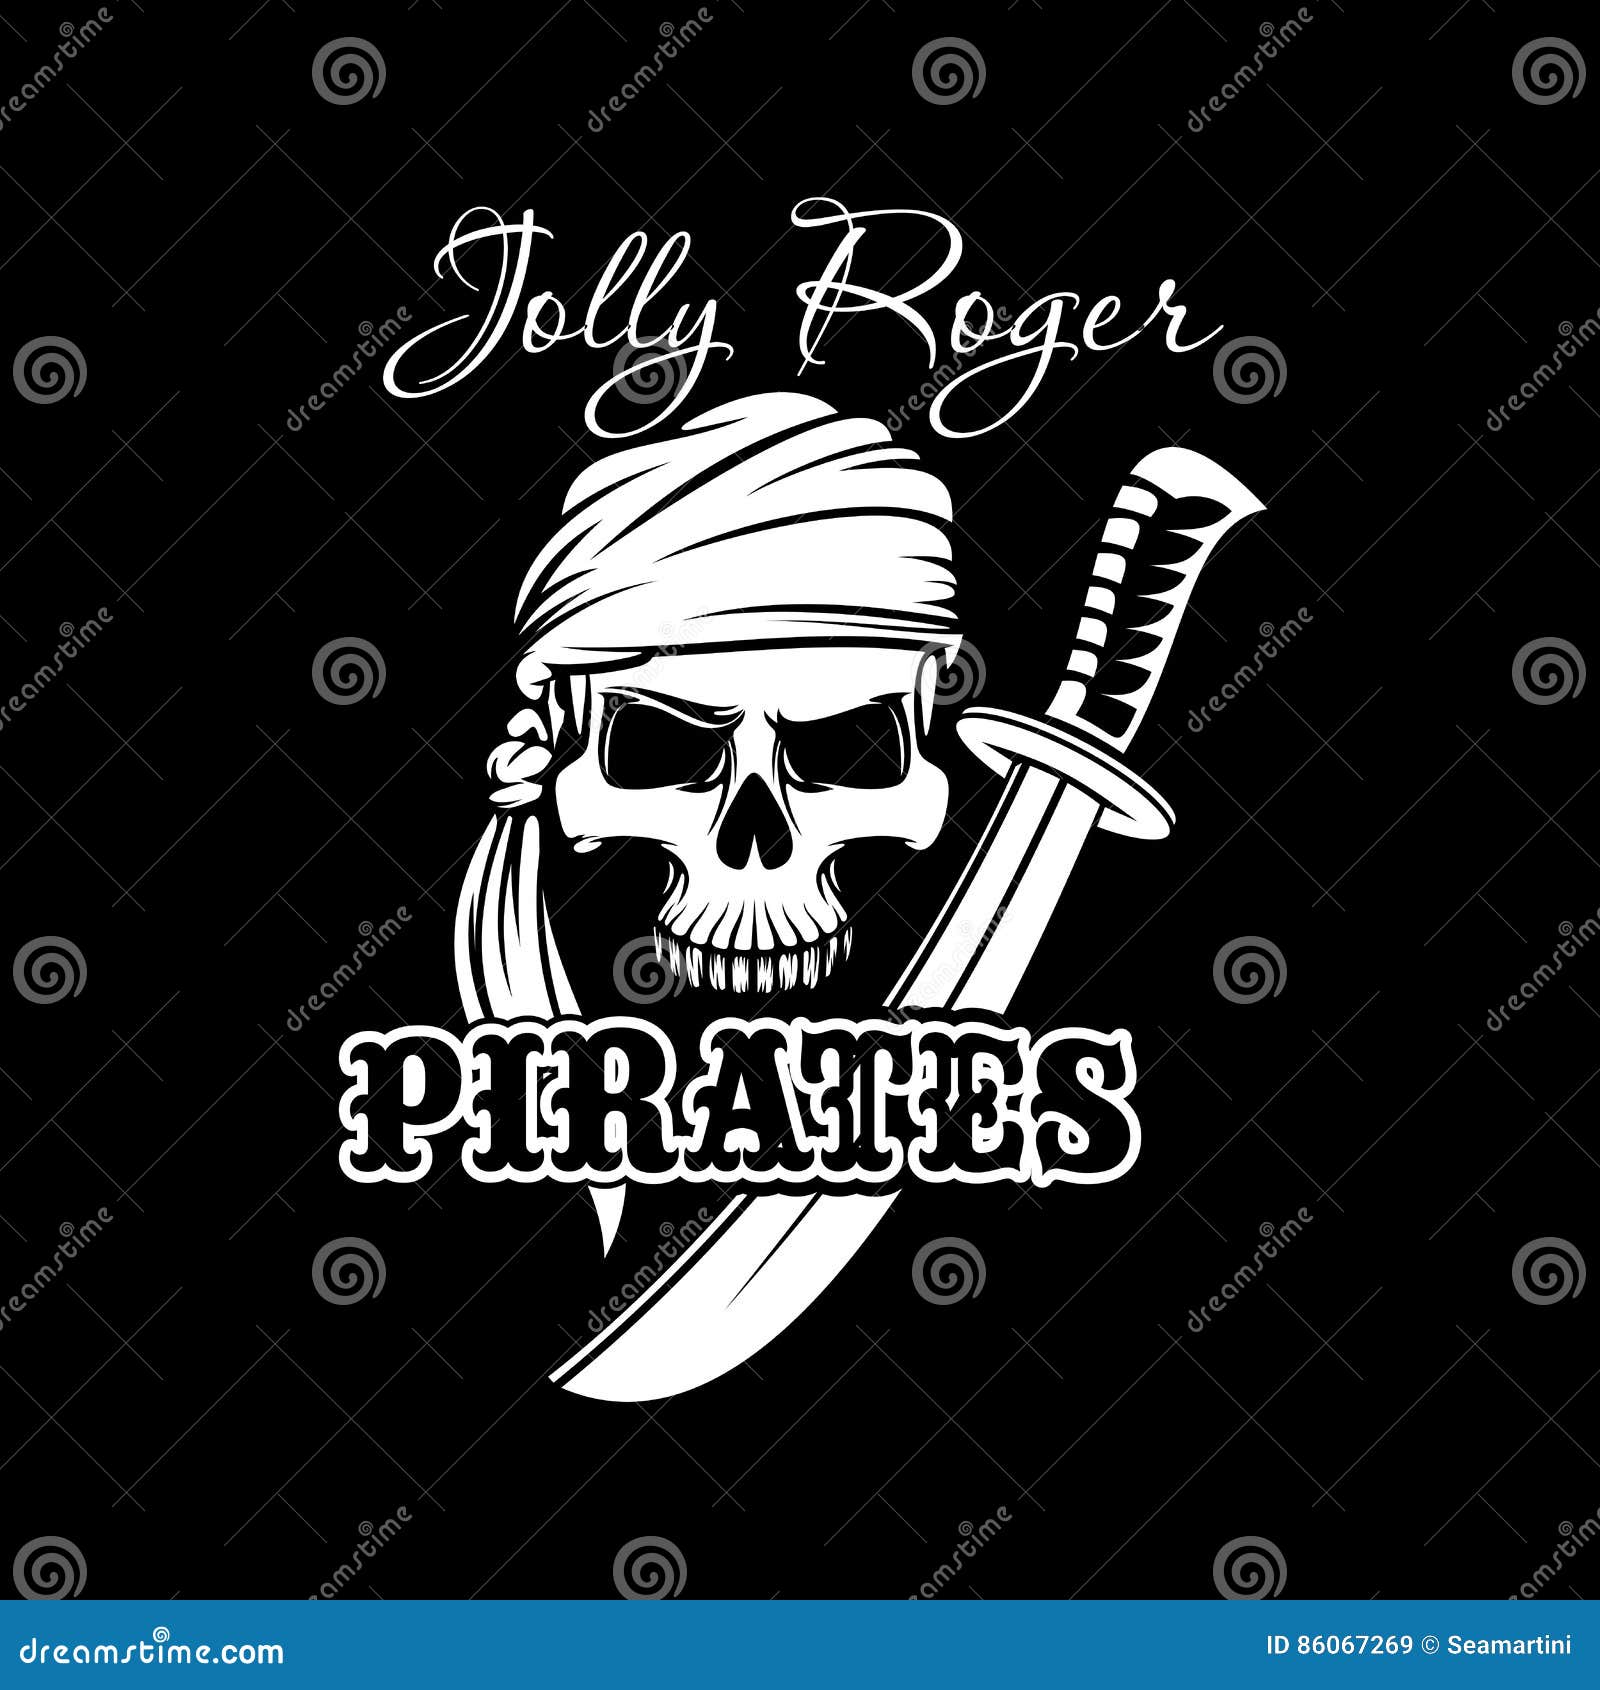 40 Pirate Flag Tattoo Designs For Men  Jolly Roger Ink Ideas  Pirate flag  tattoo Sailing tattoo Pirate tattoo